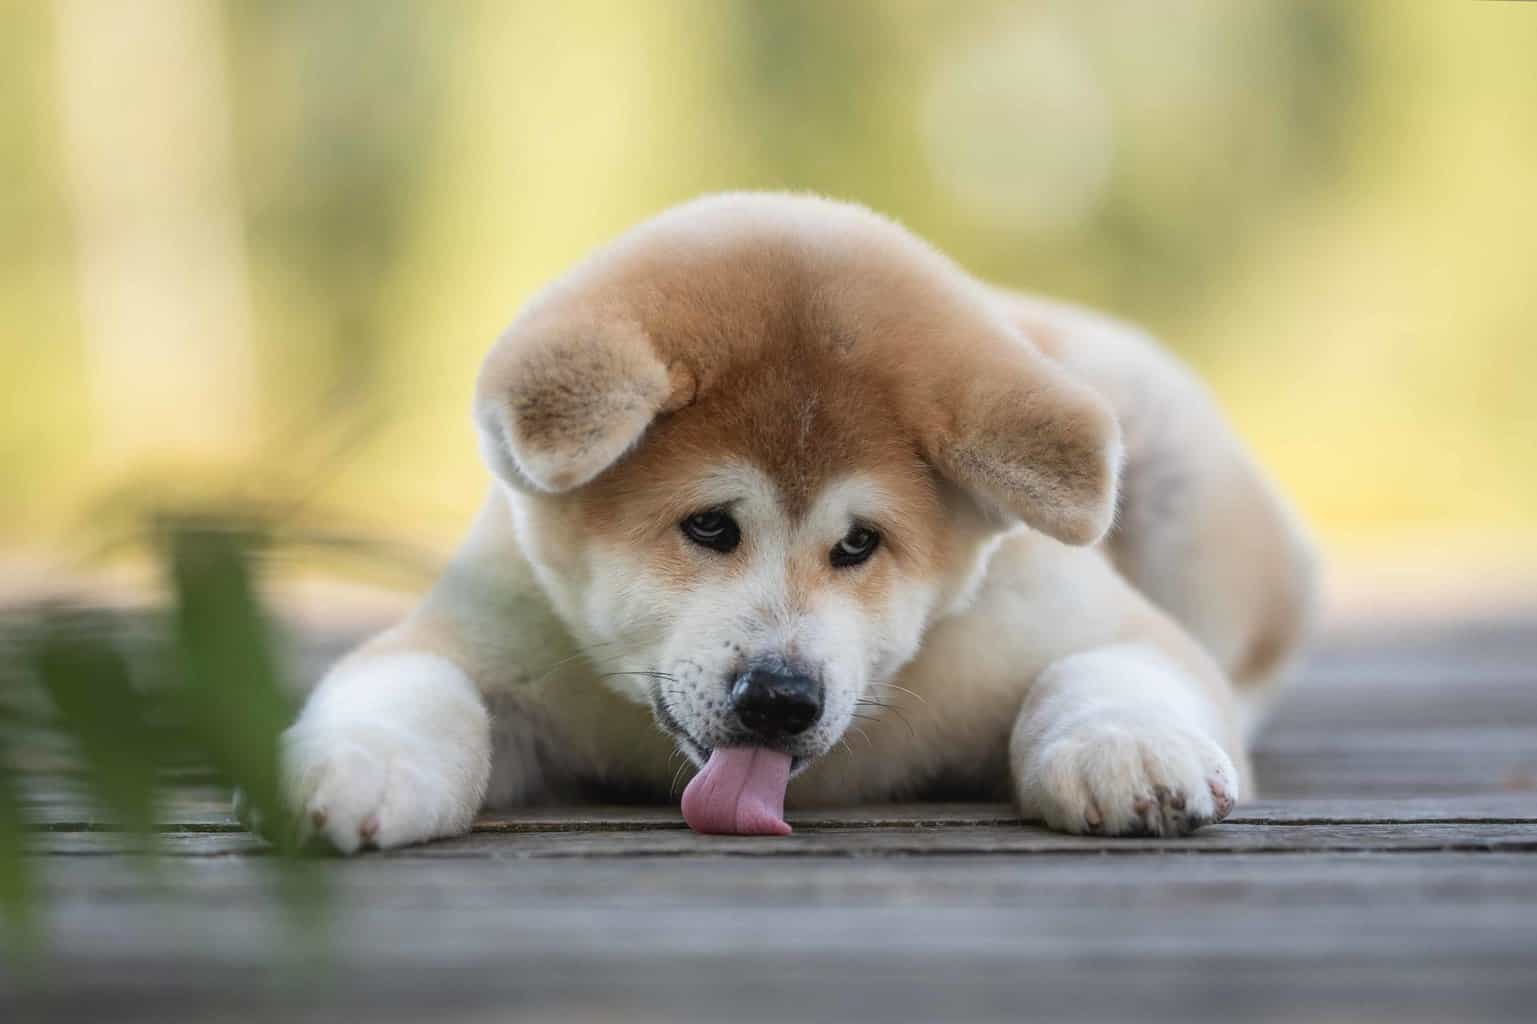 Japanese Akita puppy on deck. The Japanese Akita is naturally confident, territorially protective, and bold. It is an excellent guard dog. In his native Japan, he represents prestige, strength, loyalty, and good luck.